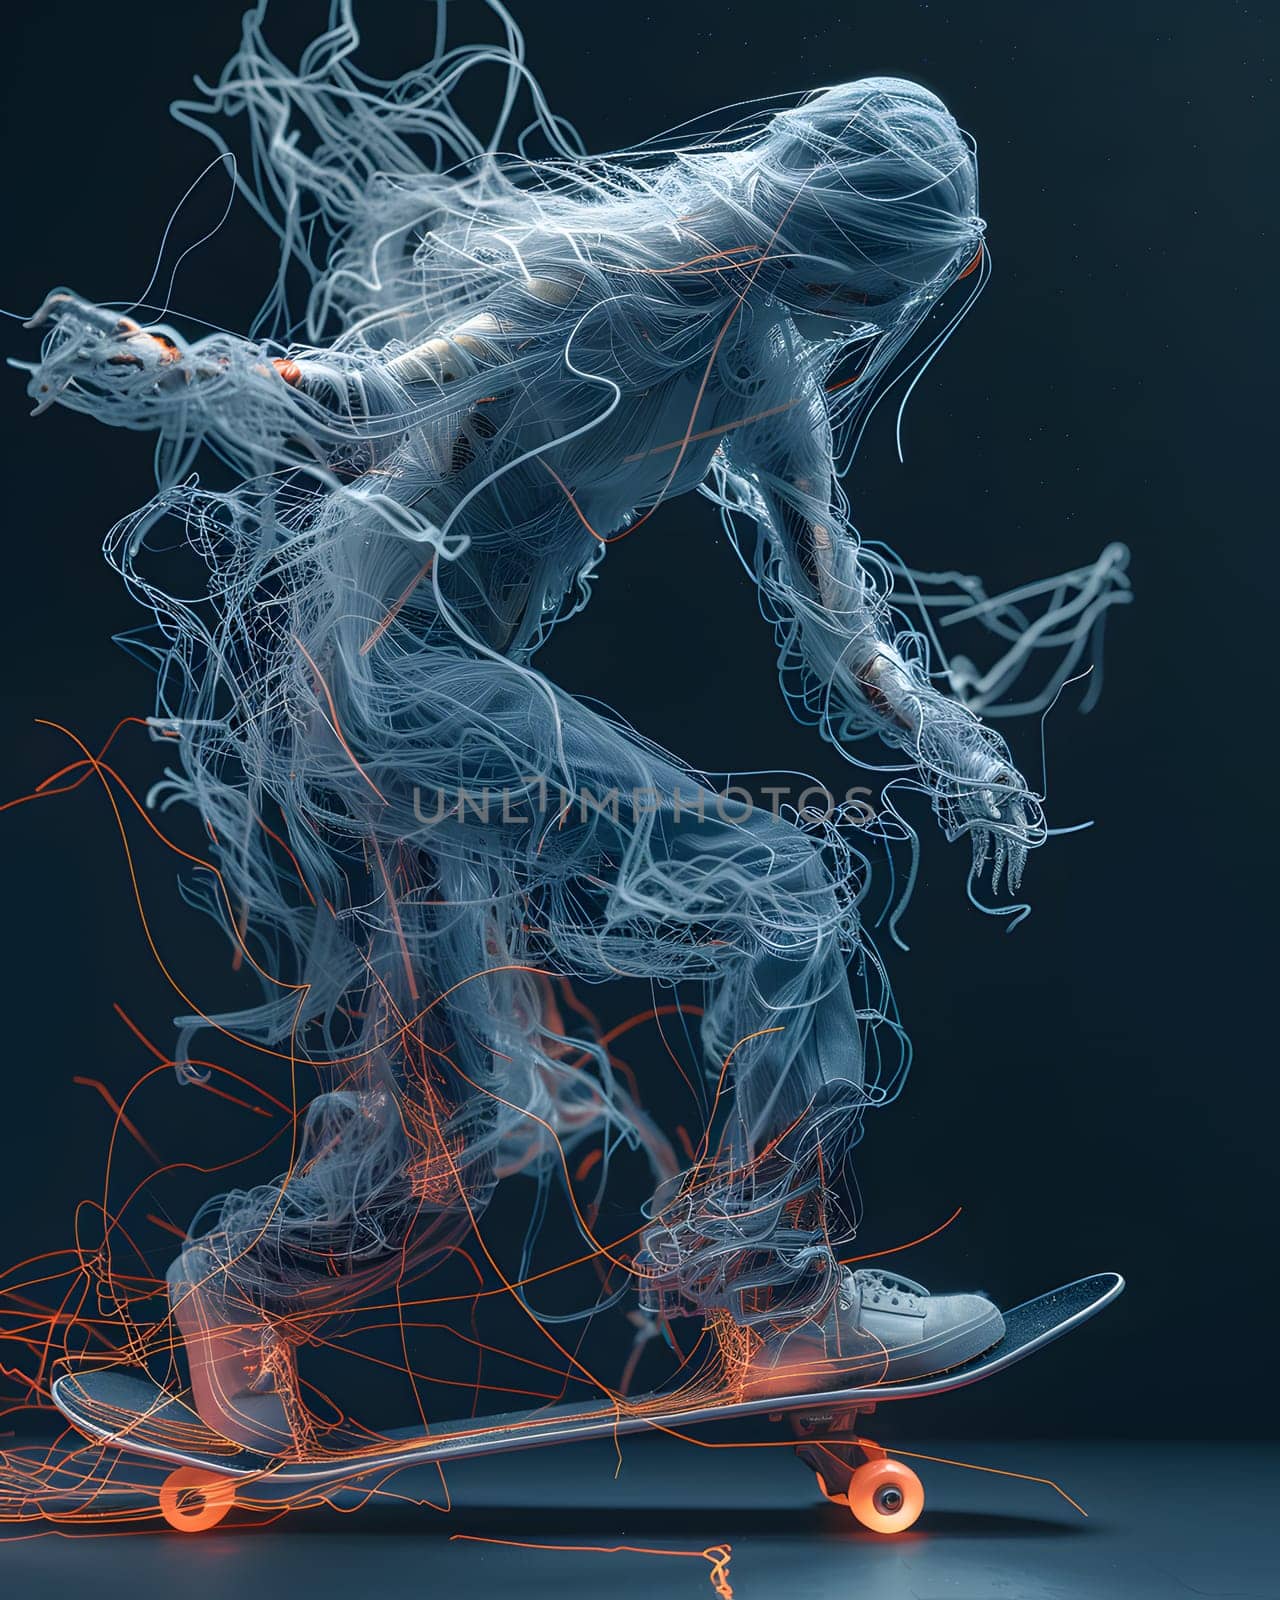 A silhouette of an organism riding a skateboard with smoke emanating from it, set against a dark background. The event is captured in electric blue CG artwork, highlighting the skateboard and truck